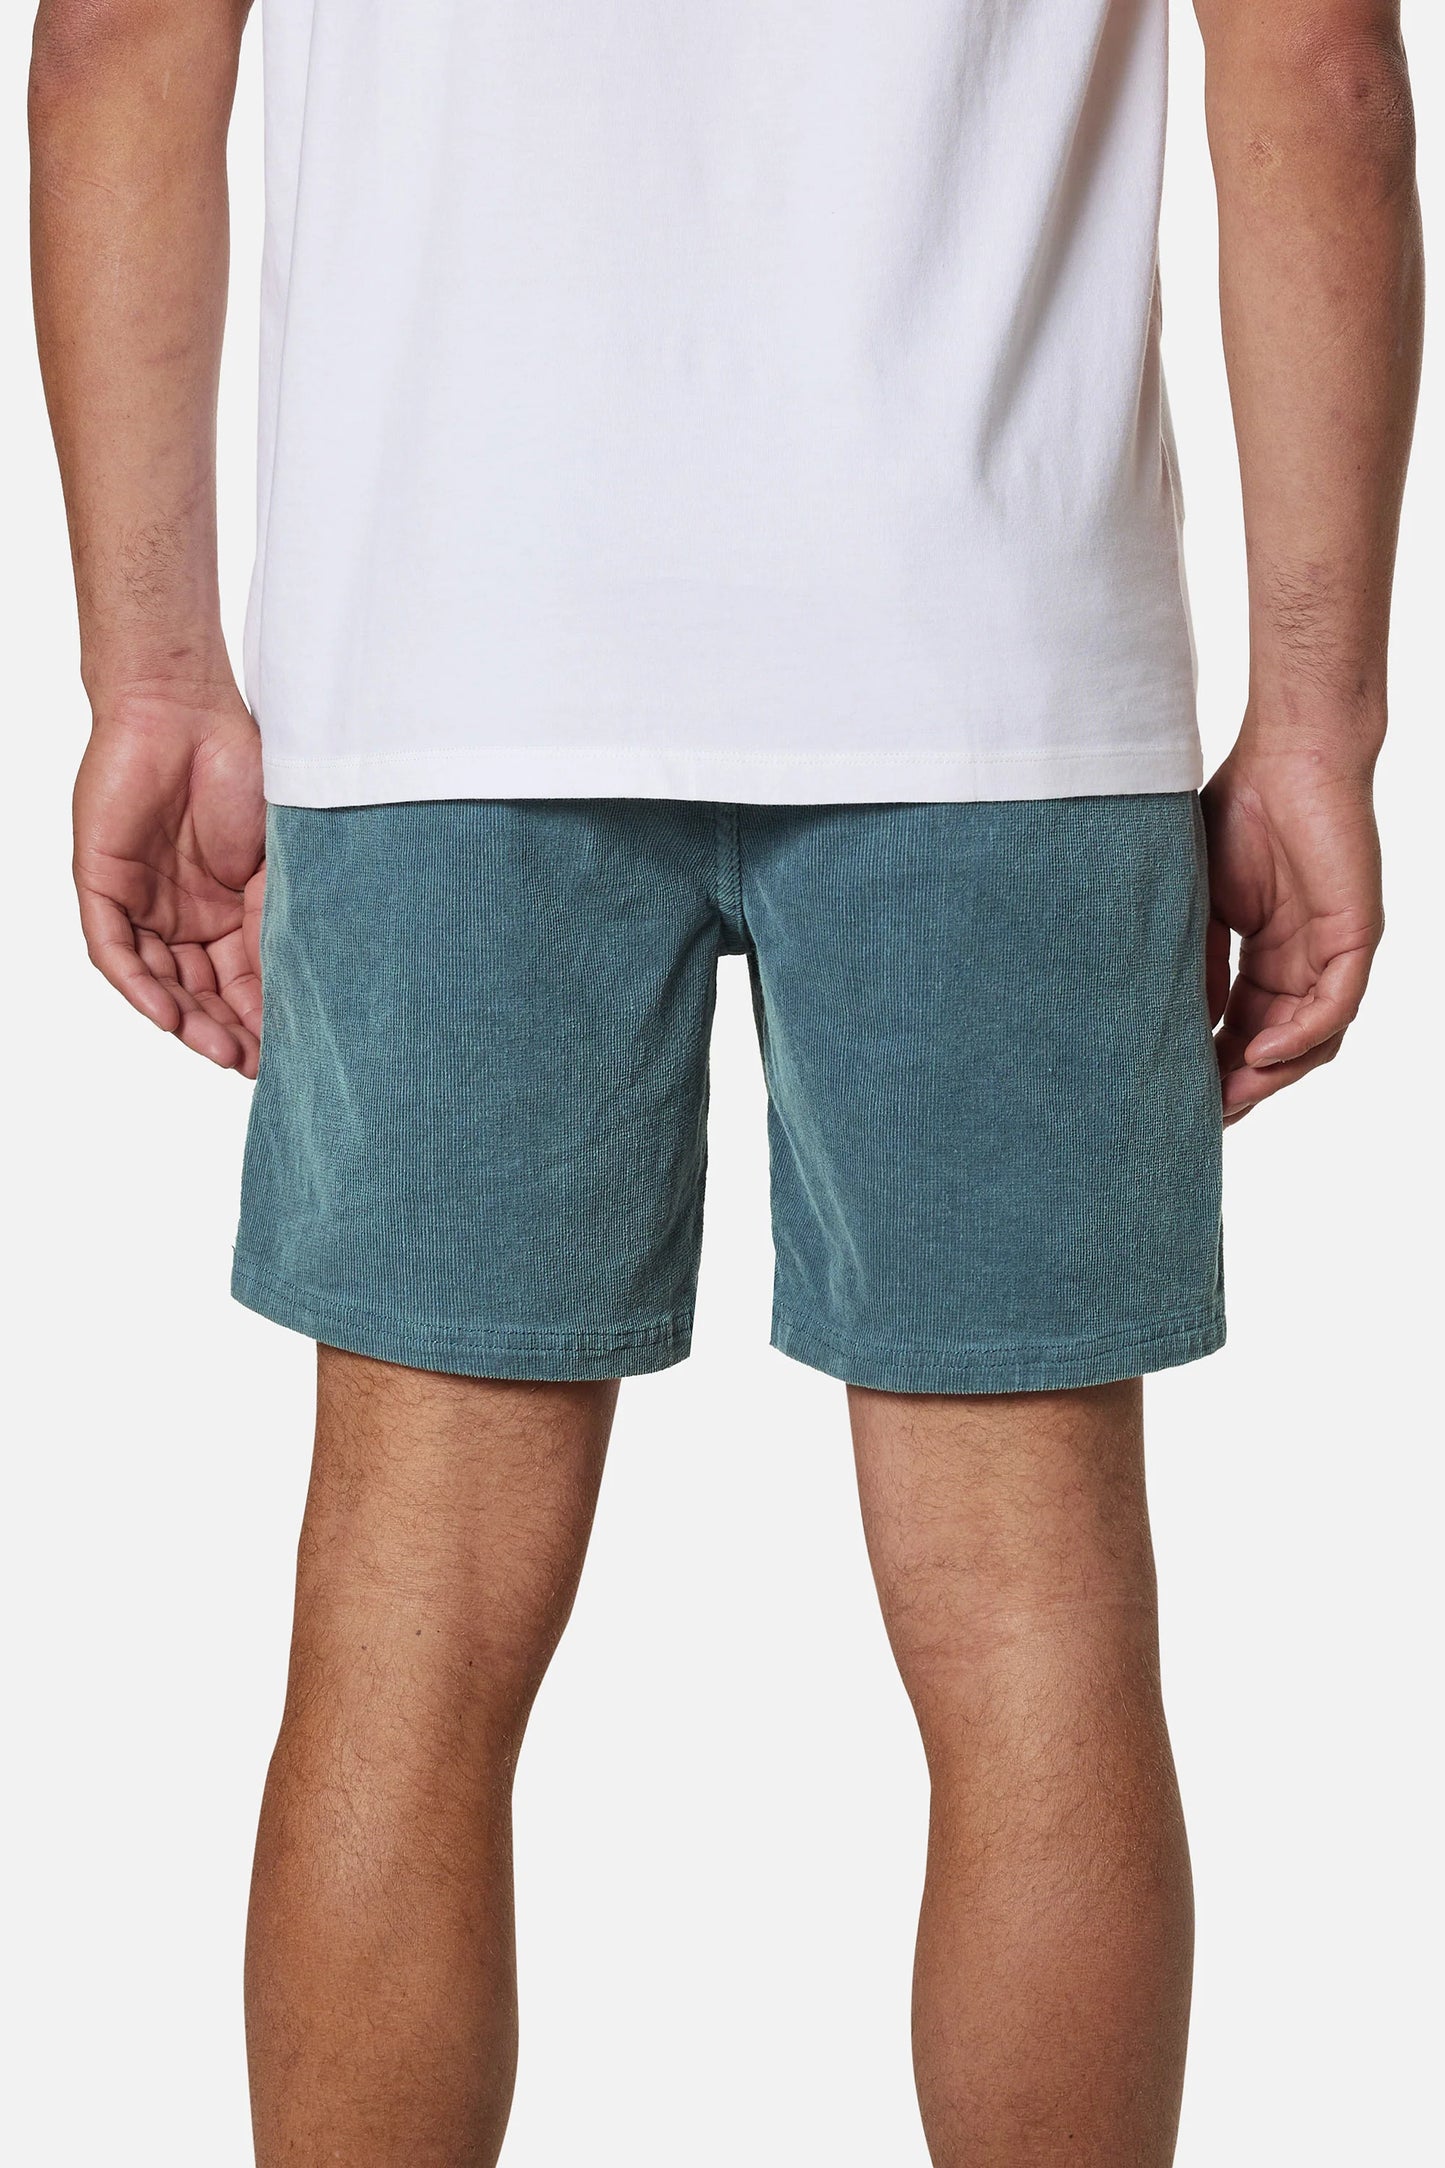 Back view of the Overcast Cord Local Men's Short by Katin